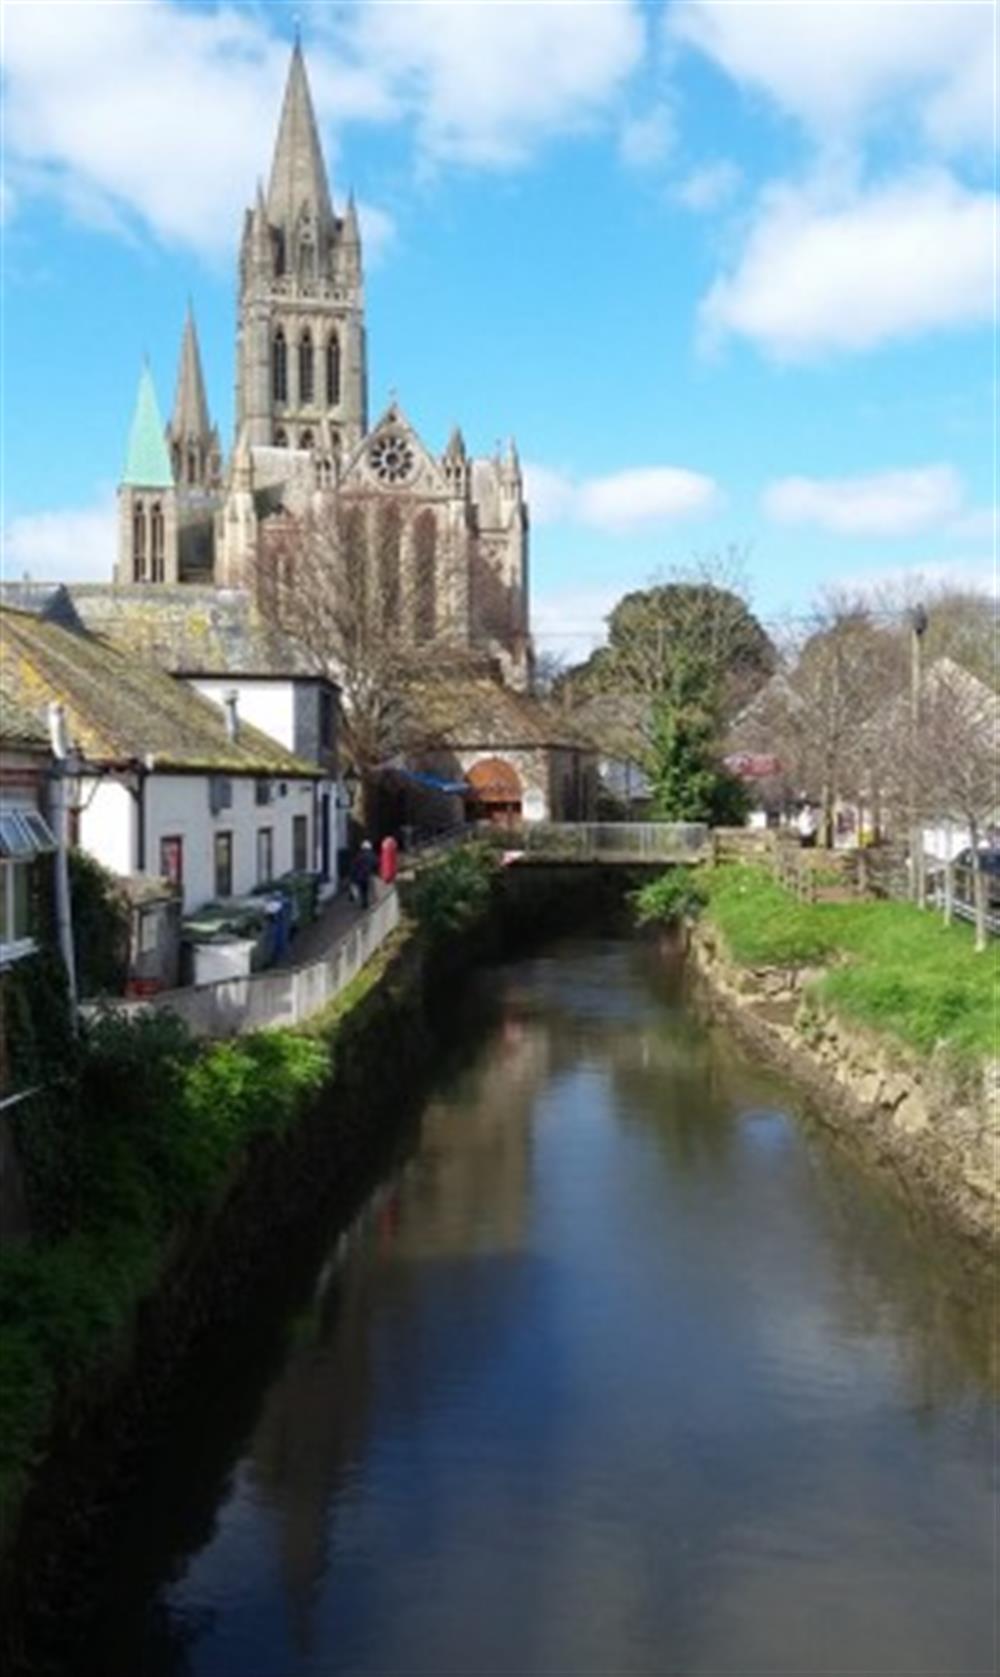 Truro is our main shopping centre, but also has a cinema and a range of restaurants, cafes etc